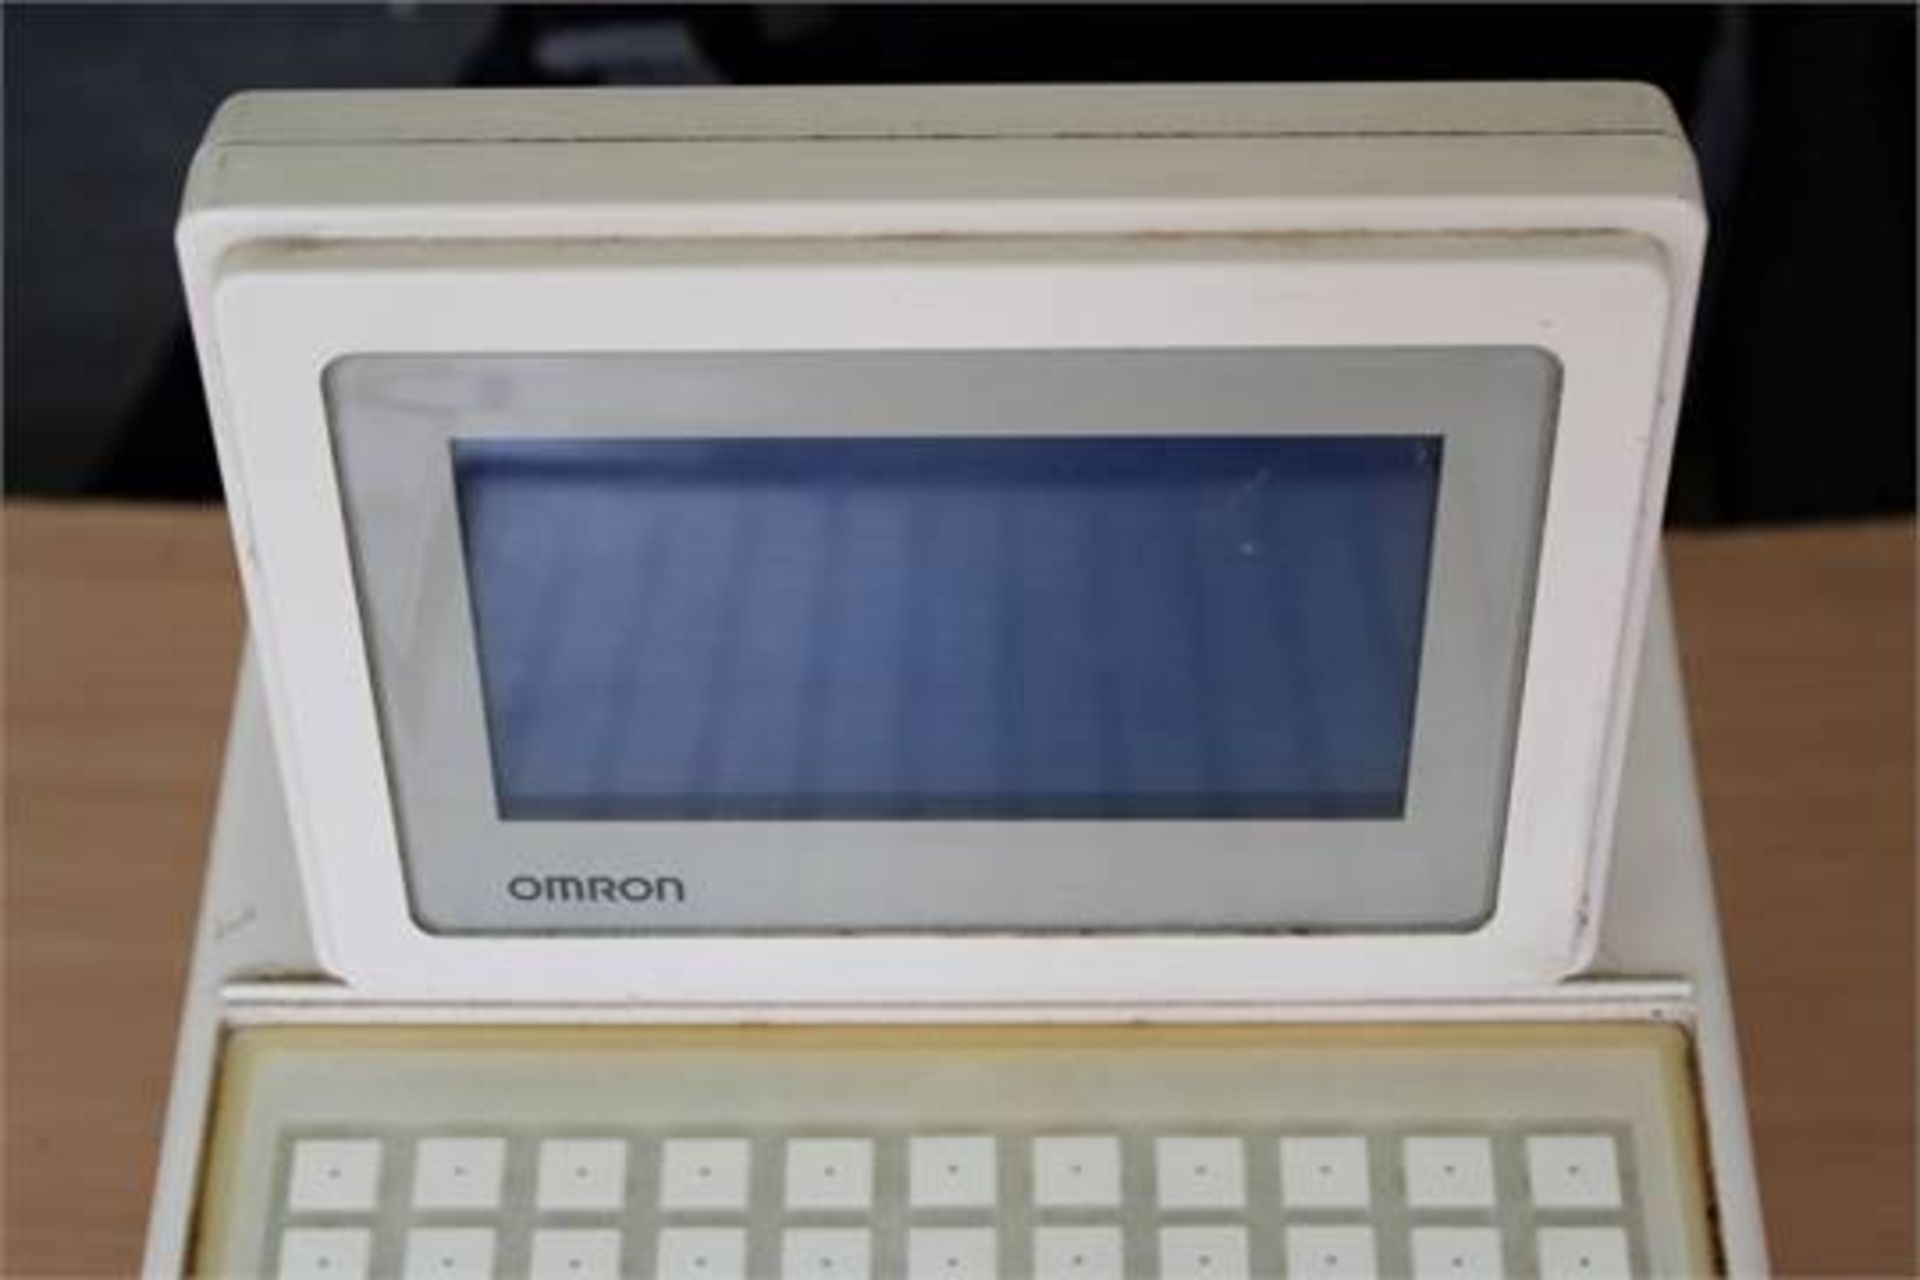 1 x Omron RS4603 Electronic EPOS Till - CL090 - Untested - Ref US BL161 - Location: Altrincham WA14 - Image 2 of 3